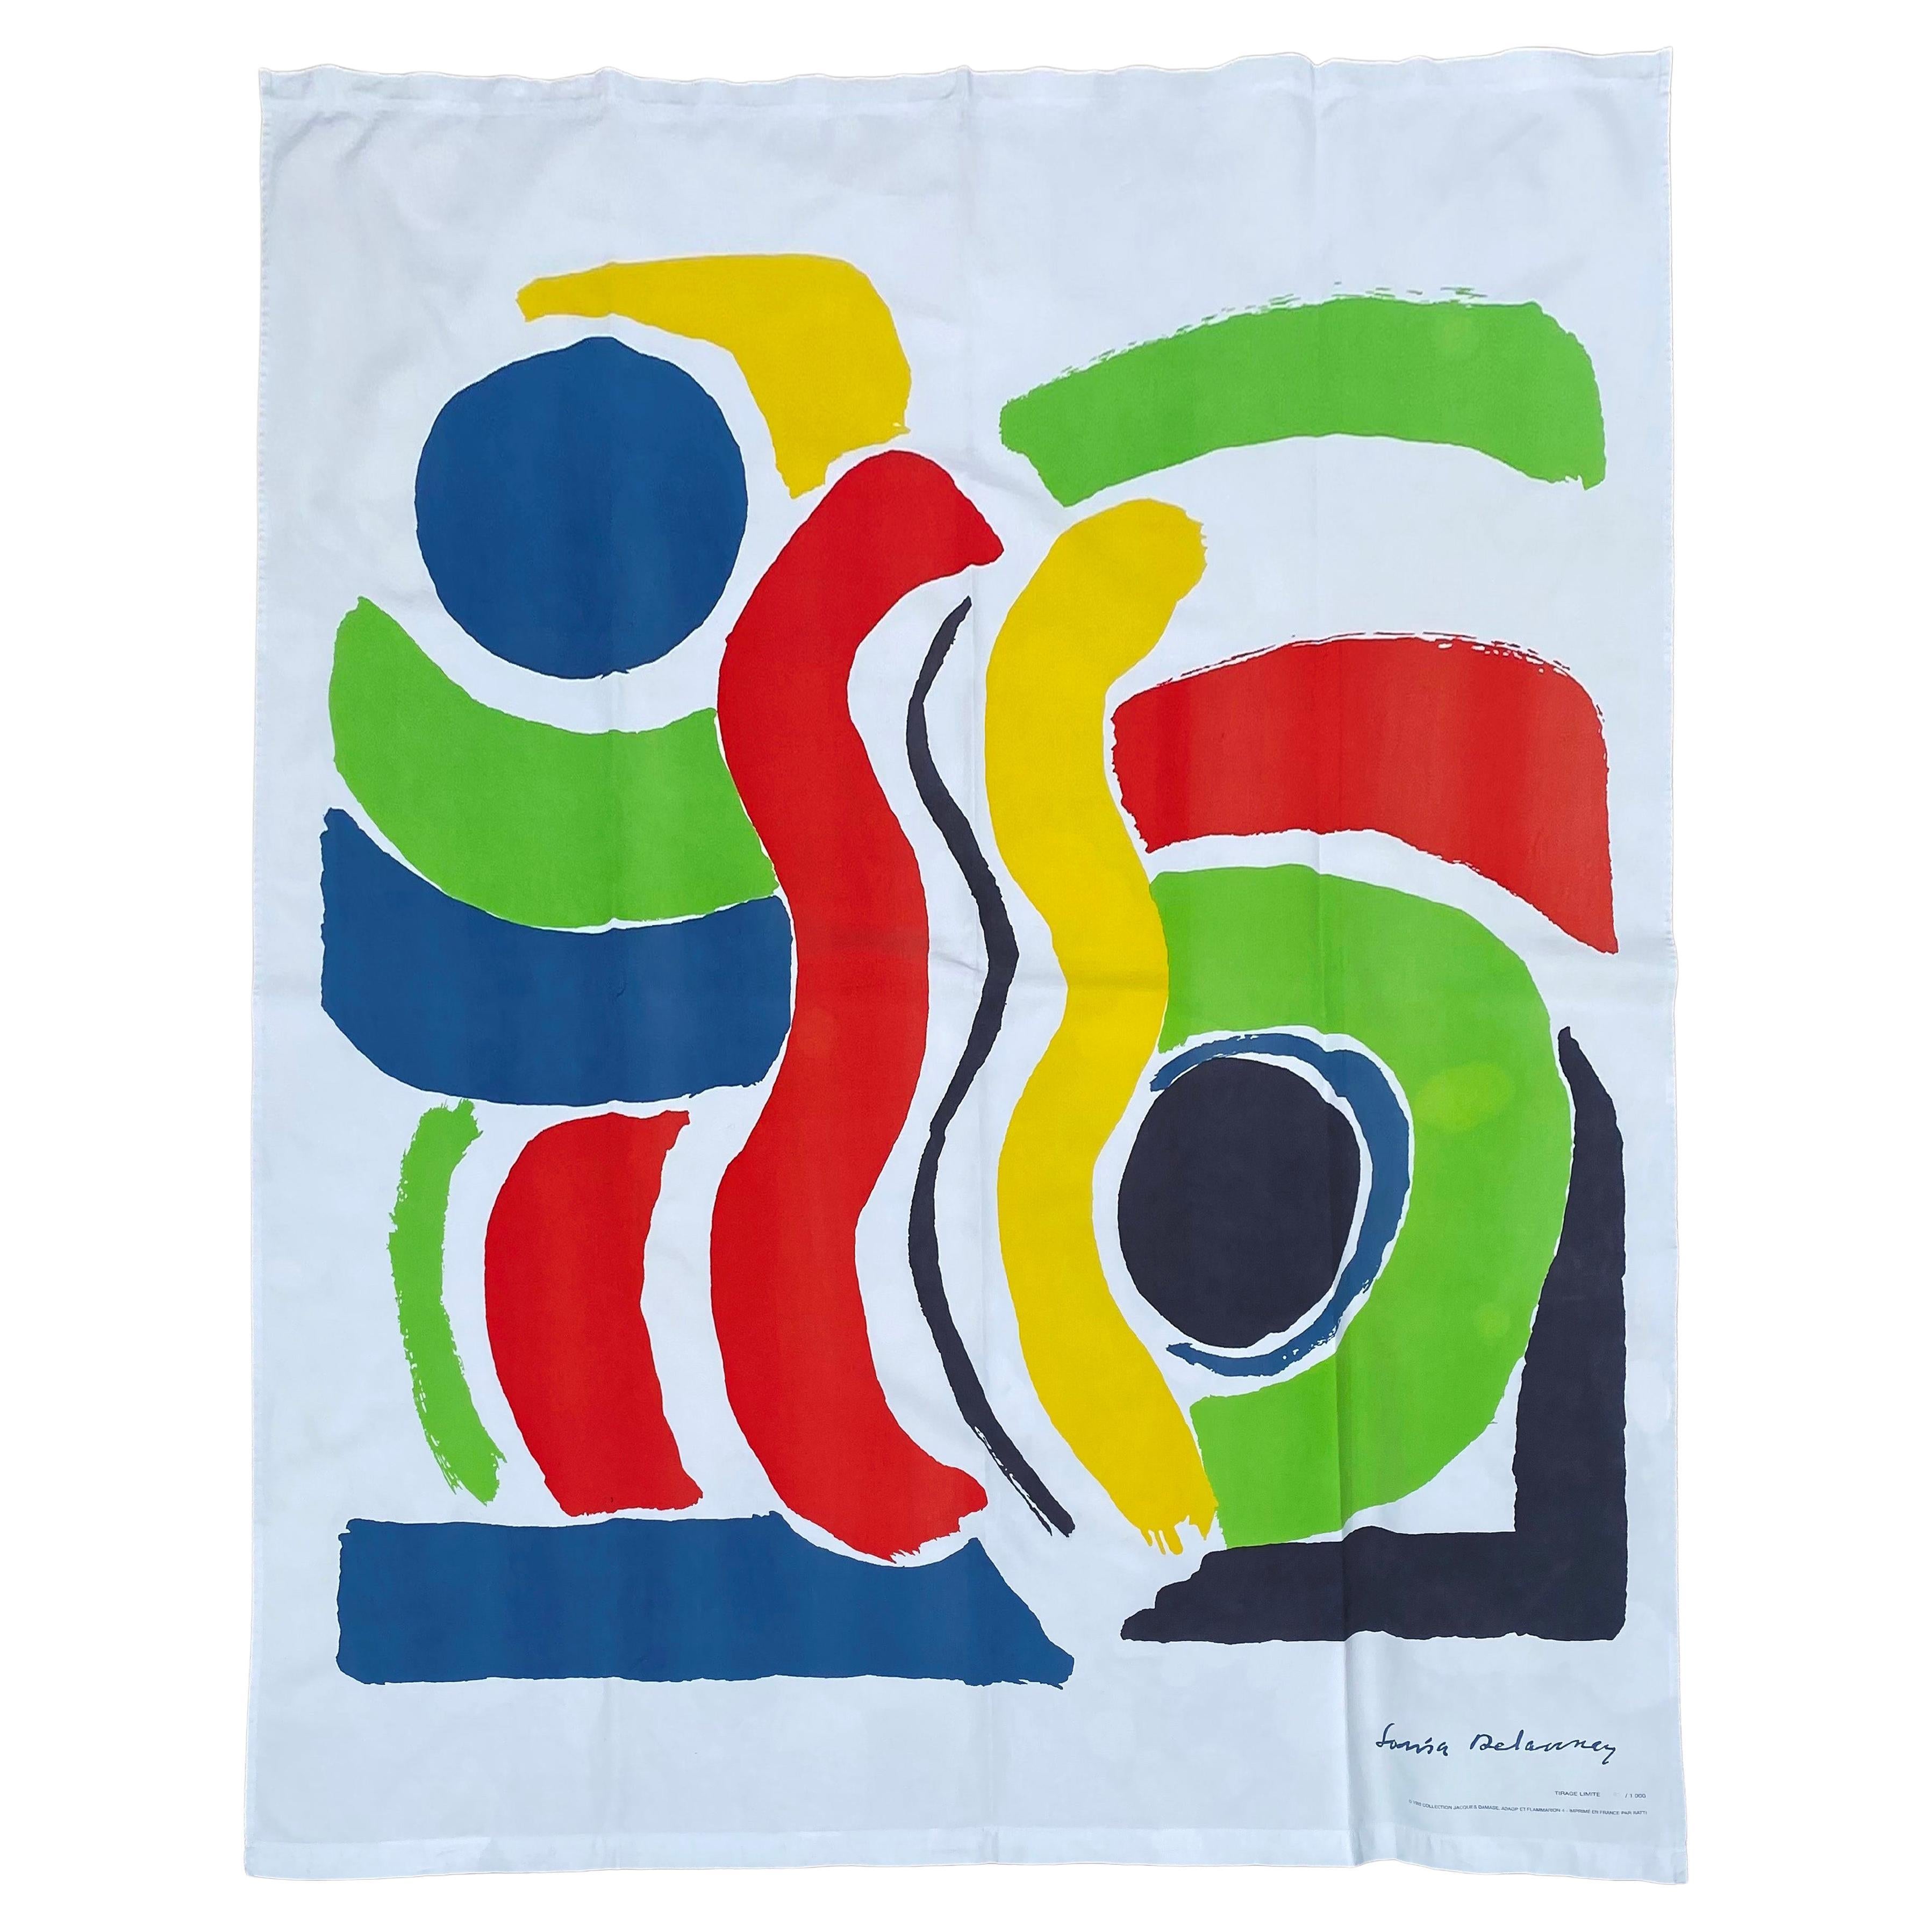 Sonia Delaunay, After "Children's Games", 1992 For Sale